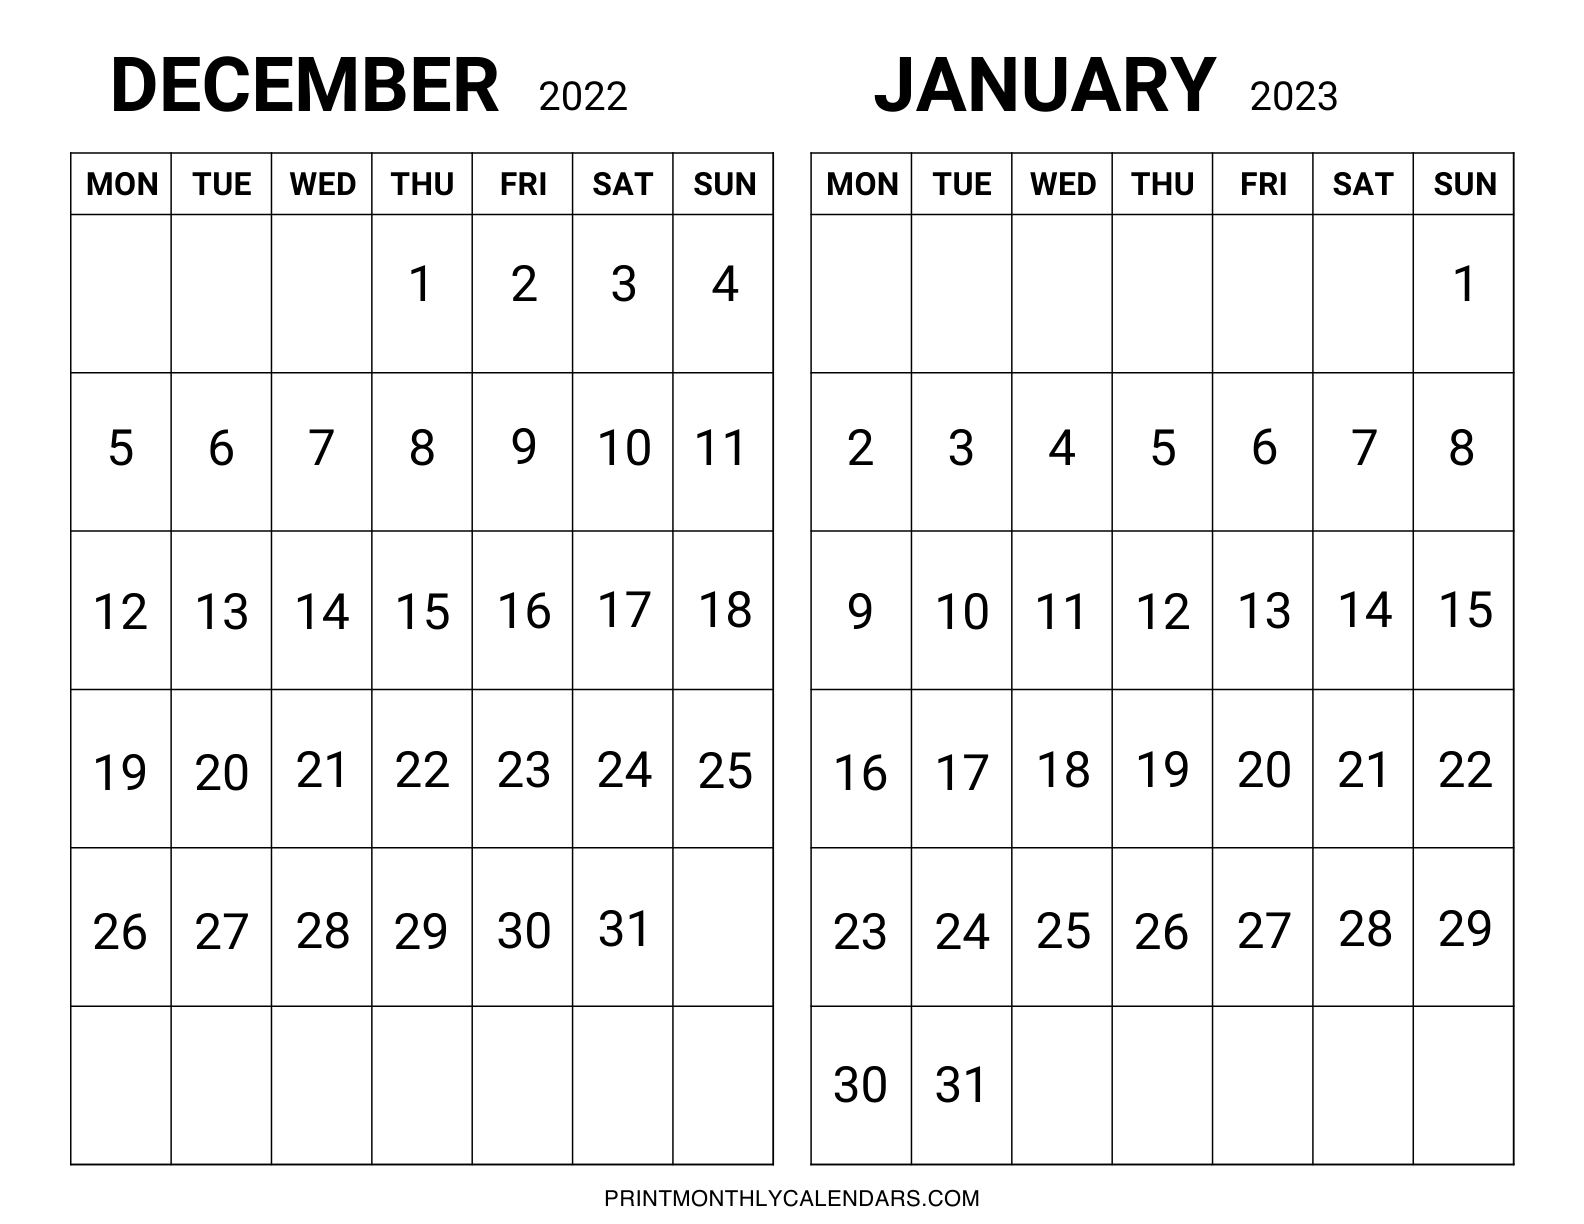 December 2022 January 2023 Calendar template has two month grids arranged in landscape layout. Both calendars are designed on one page with bold monthly dates and weekdays starting from Monday instead of Sunday.